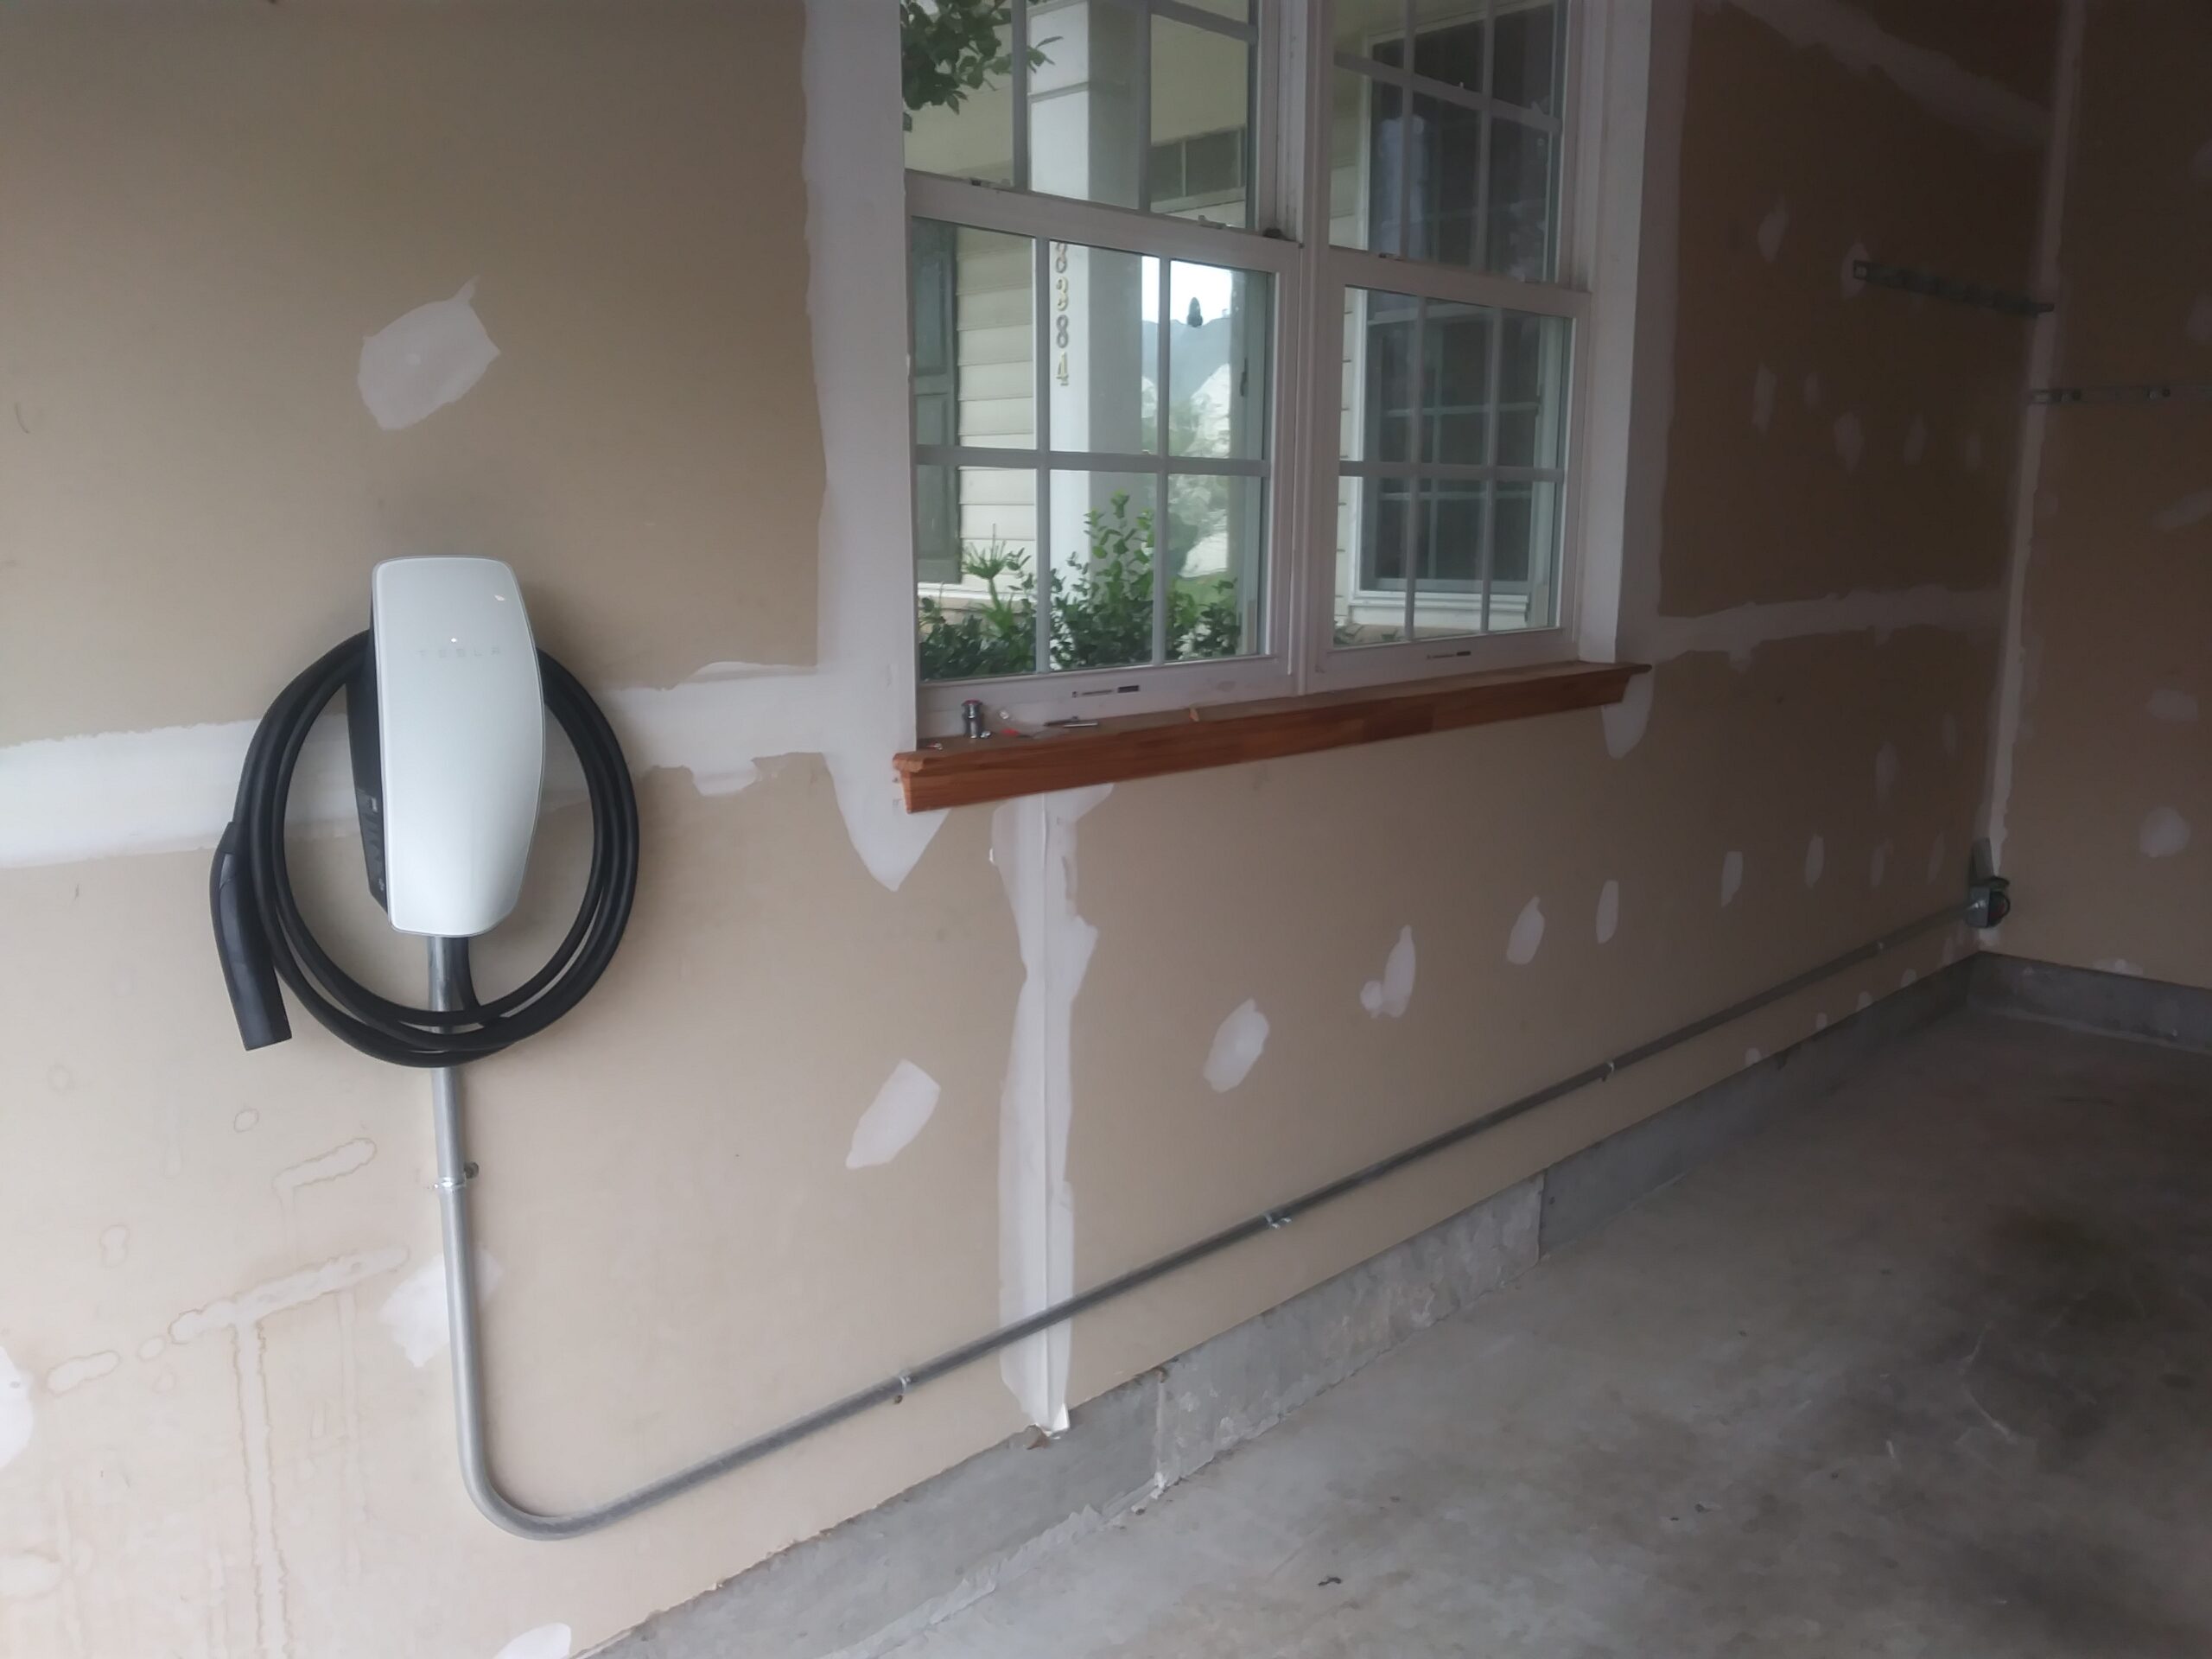 Past Tesla Wall Connector Installation with PVC Conduit #evchargers 